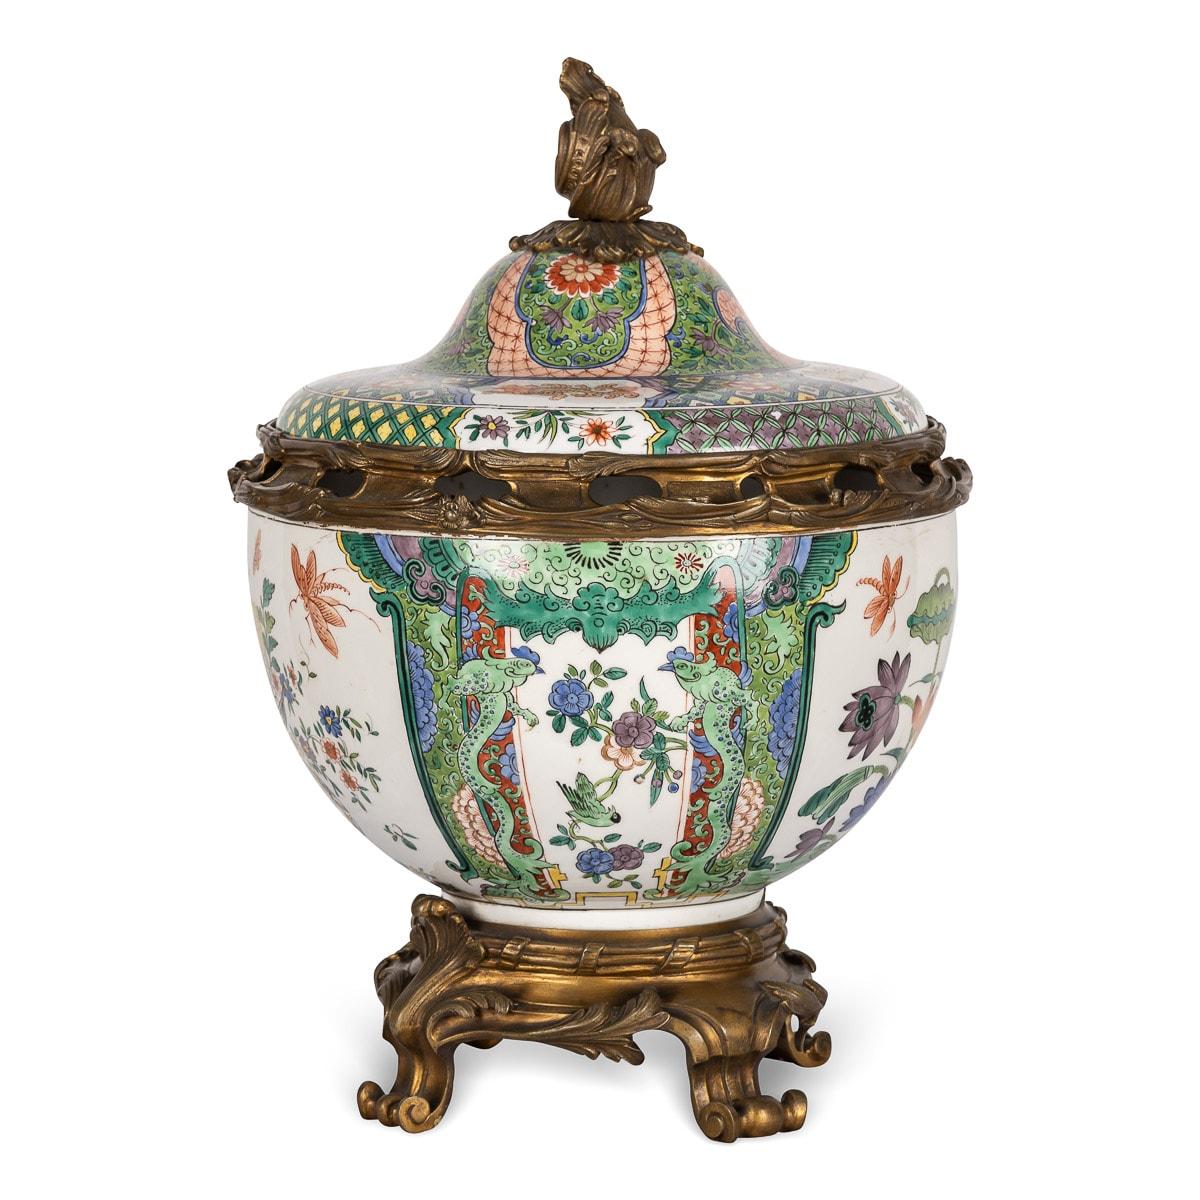 Antique 19th Century Samson vase and cover decorated with polychrome enamel, depicting scenes of various flora, fauna and stylised oriental decoration, lid mounted with ormolu, scrolling acanthus finial and raised on four-feet scroll